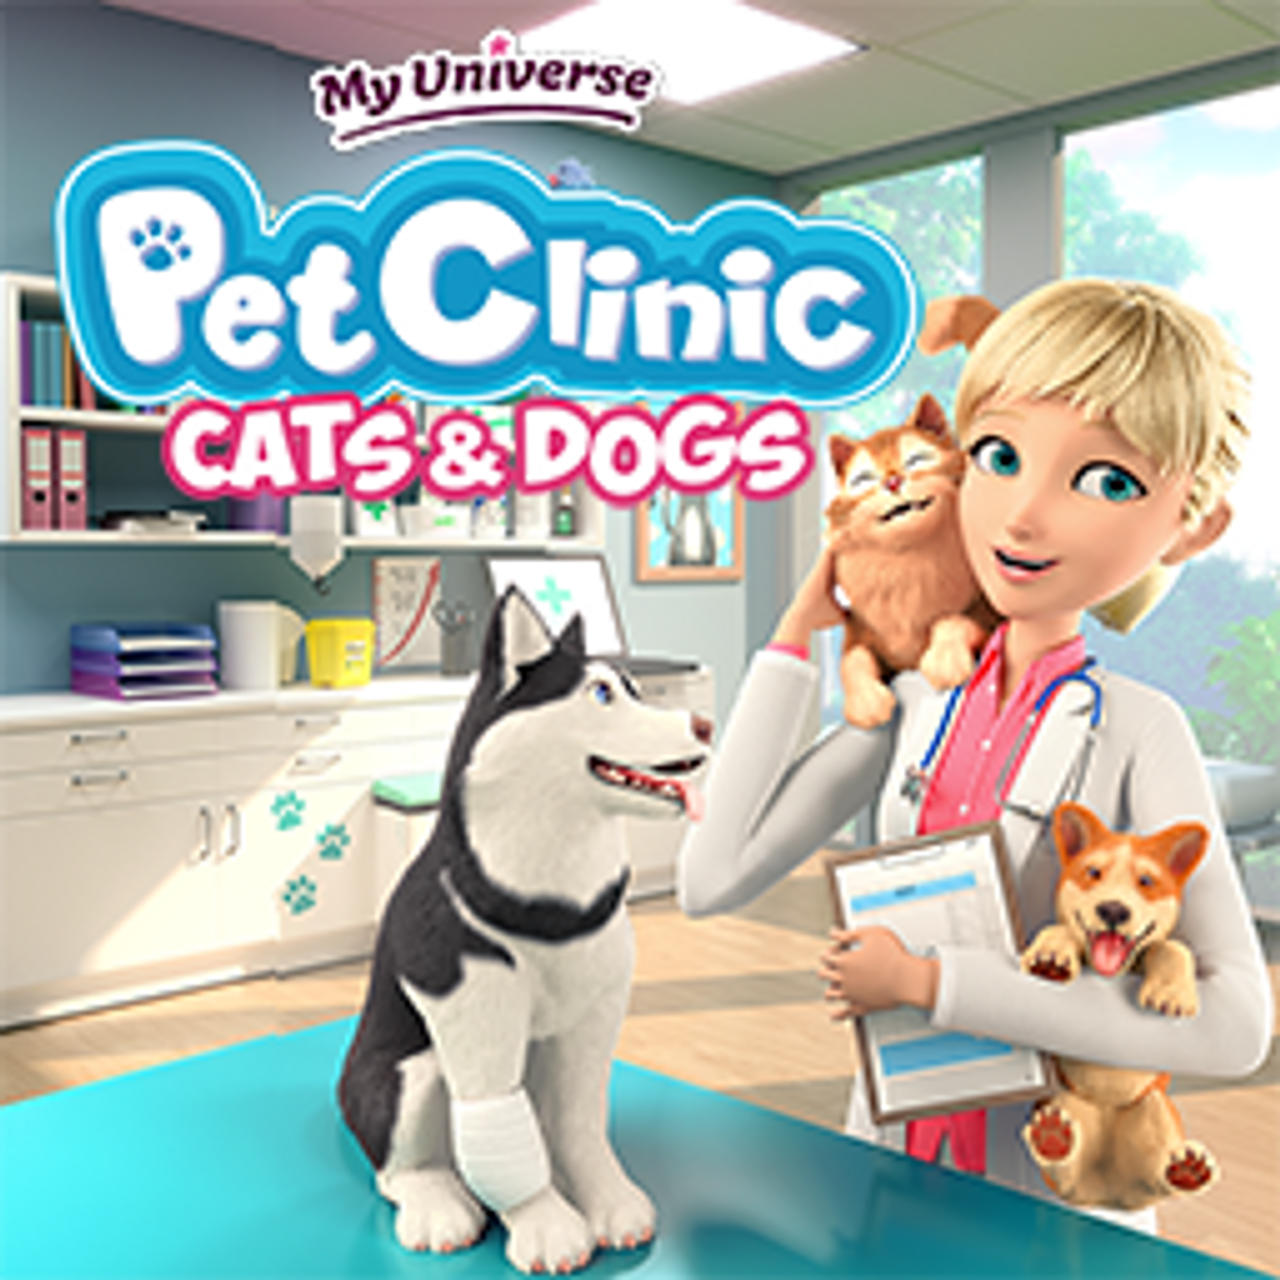 My Universe - Pet Clinic Cats and Dogs